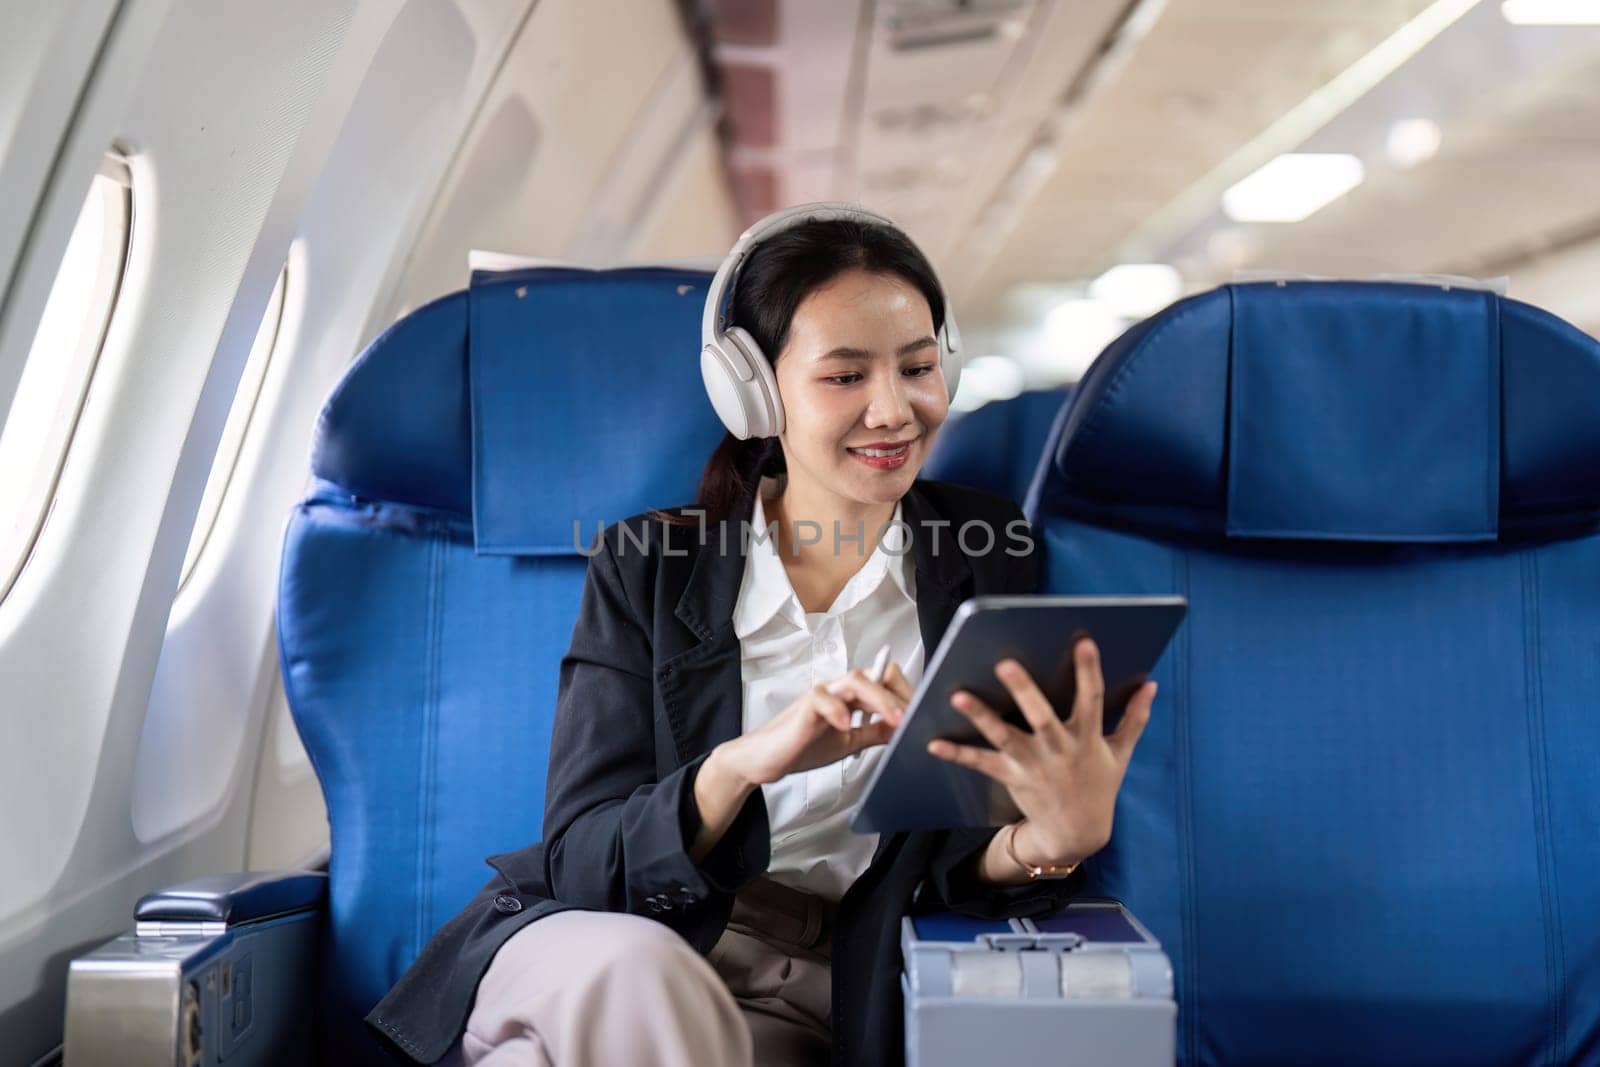 Businesswoman working on tablet during flight. Concept of business travel and technology by nateemee